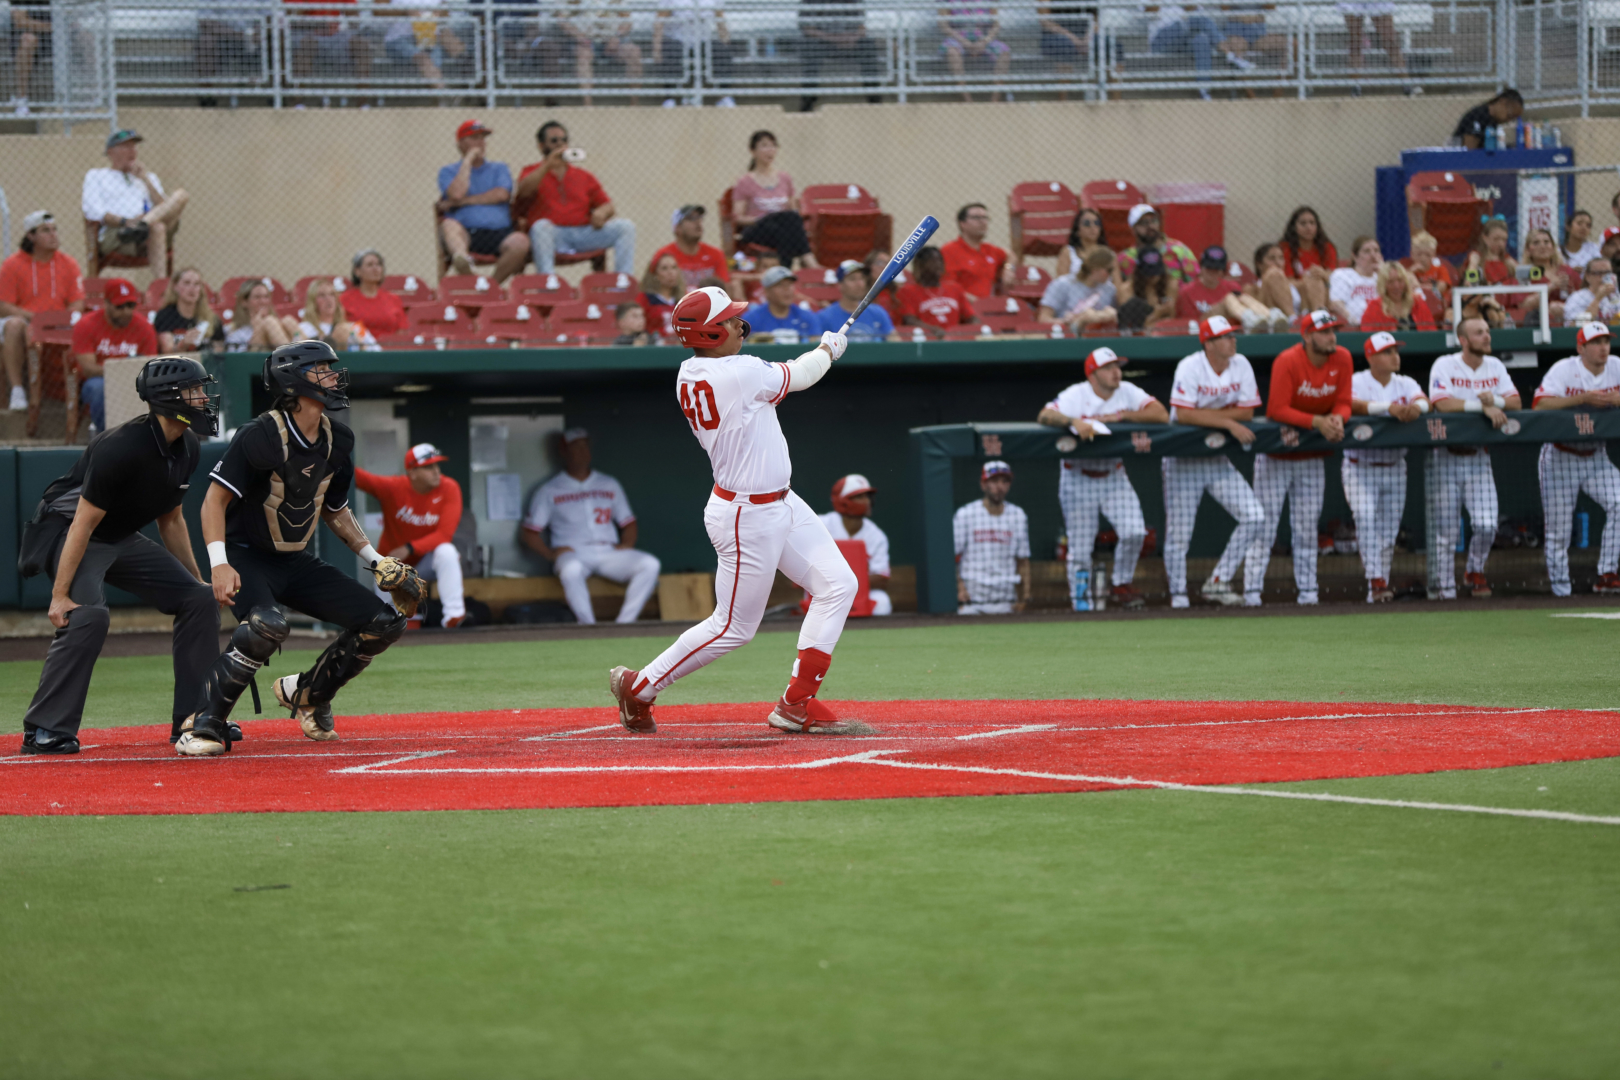 UH baseball first baseman Ryan Hernandez launched home runs No. 10 and 11 on Friday night as part of his five RBI game in the Cougars victory over UCF. | James Mueller/The Cougar